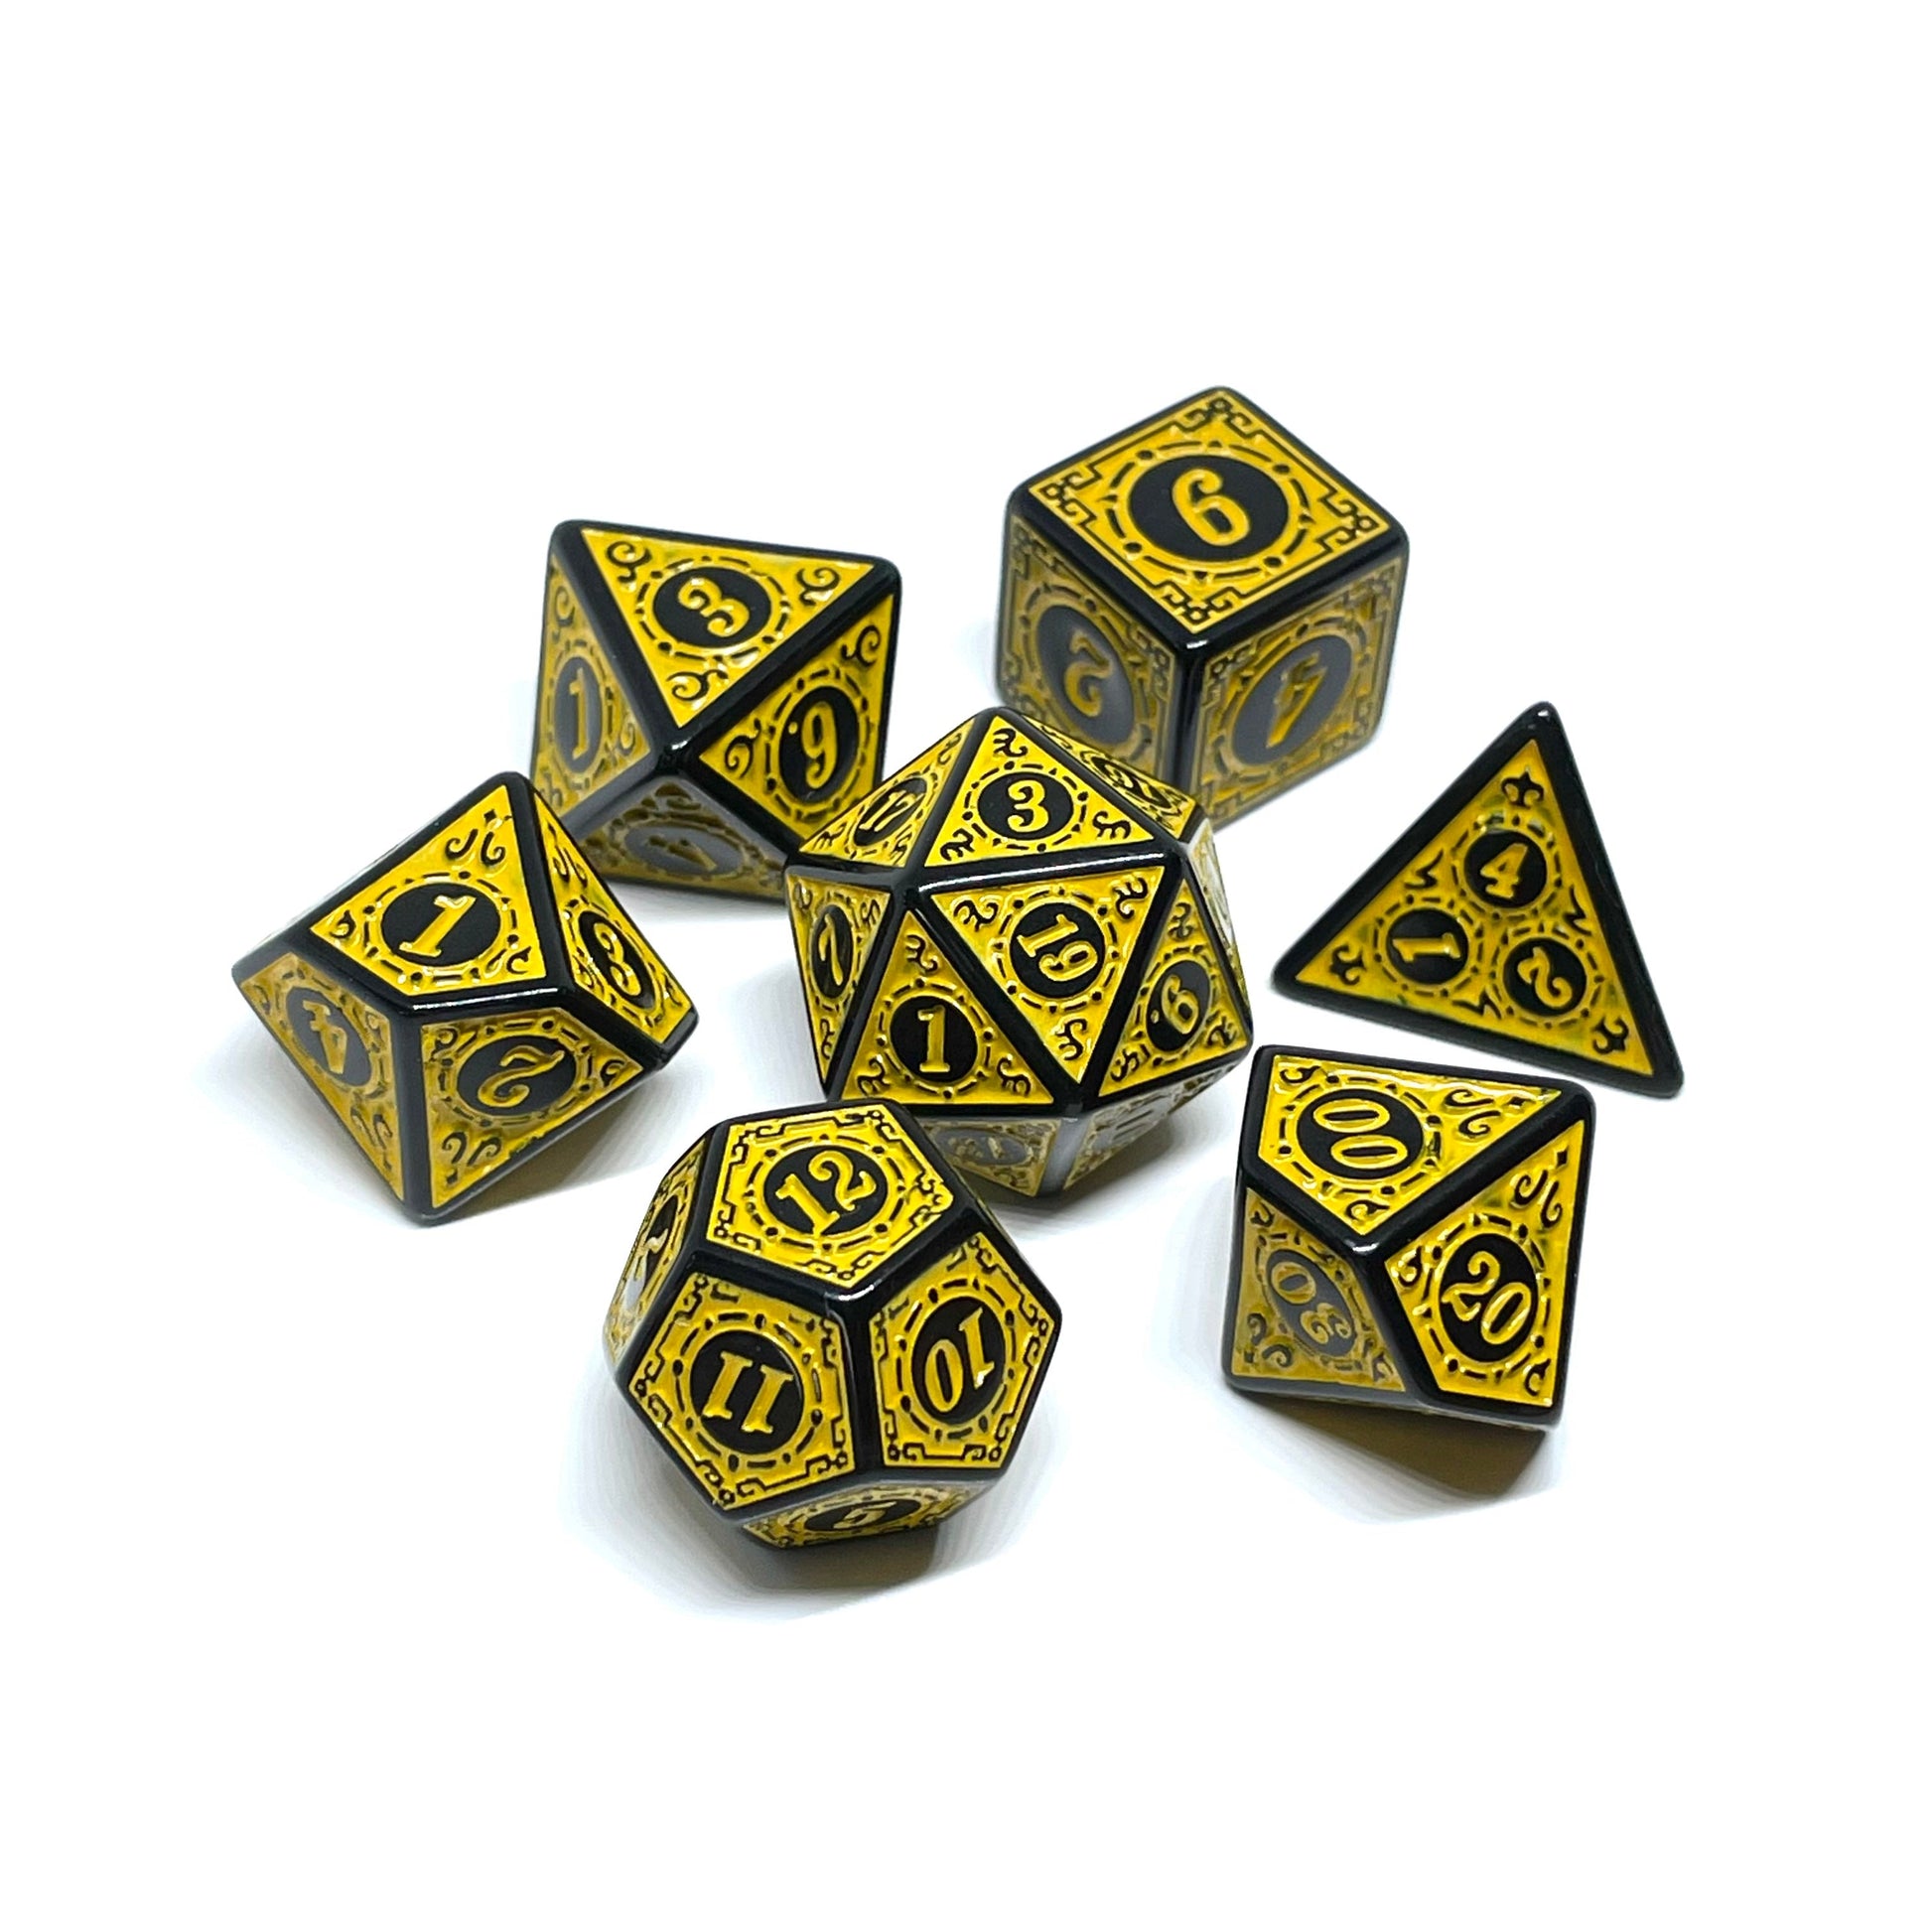 Gold Dragon dnd dice set yellow and black